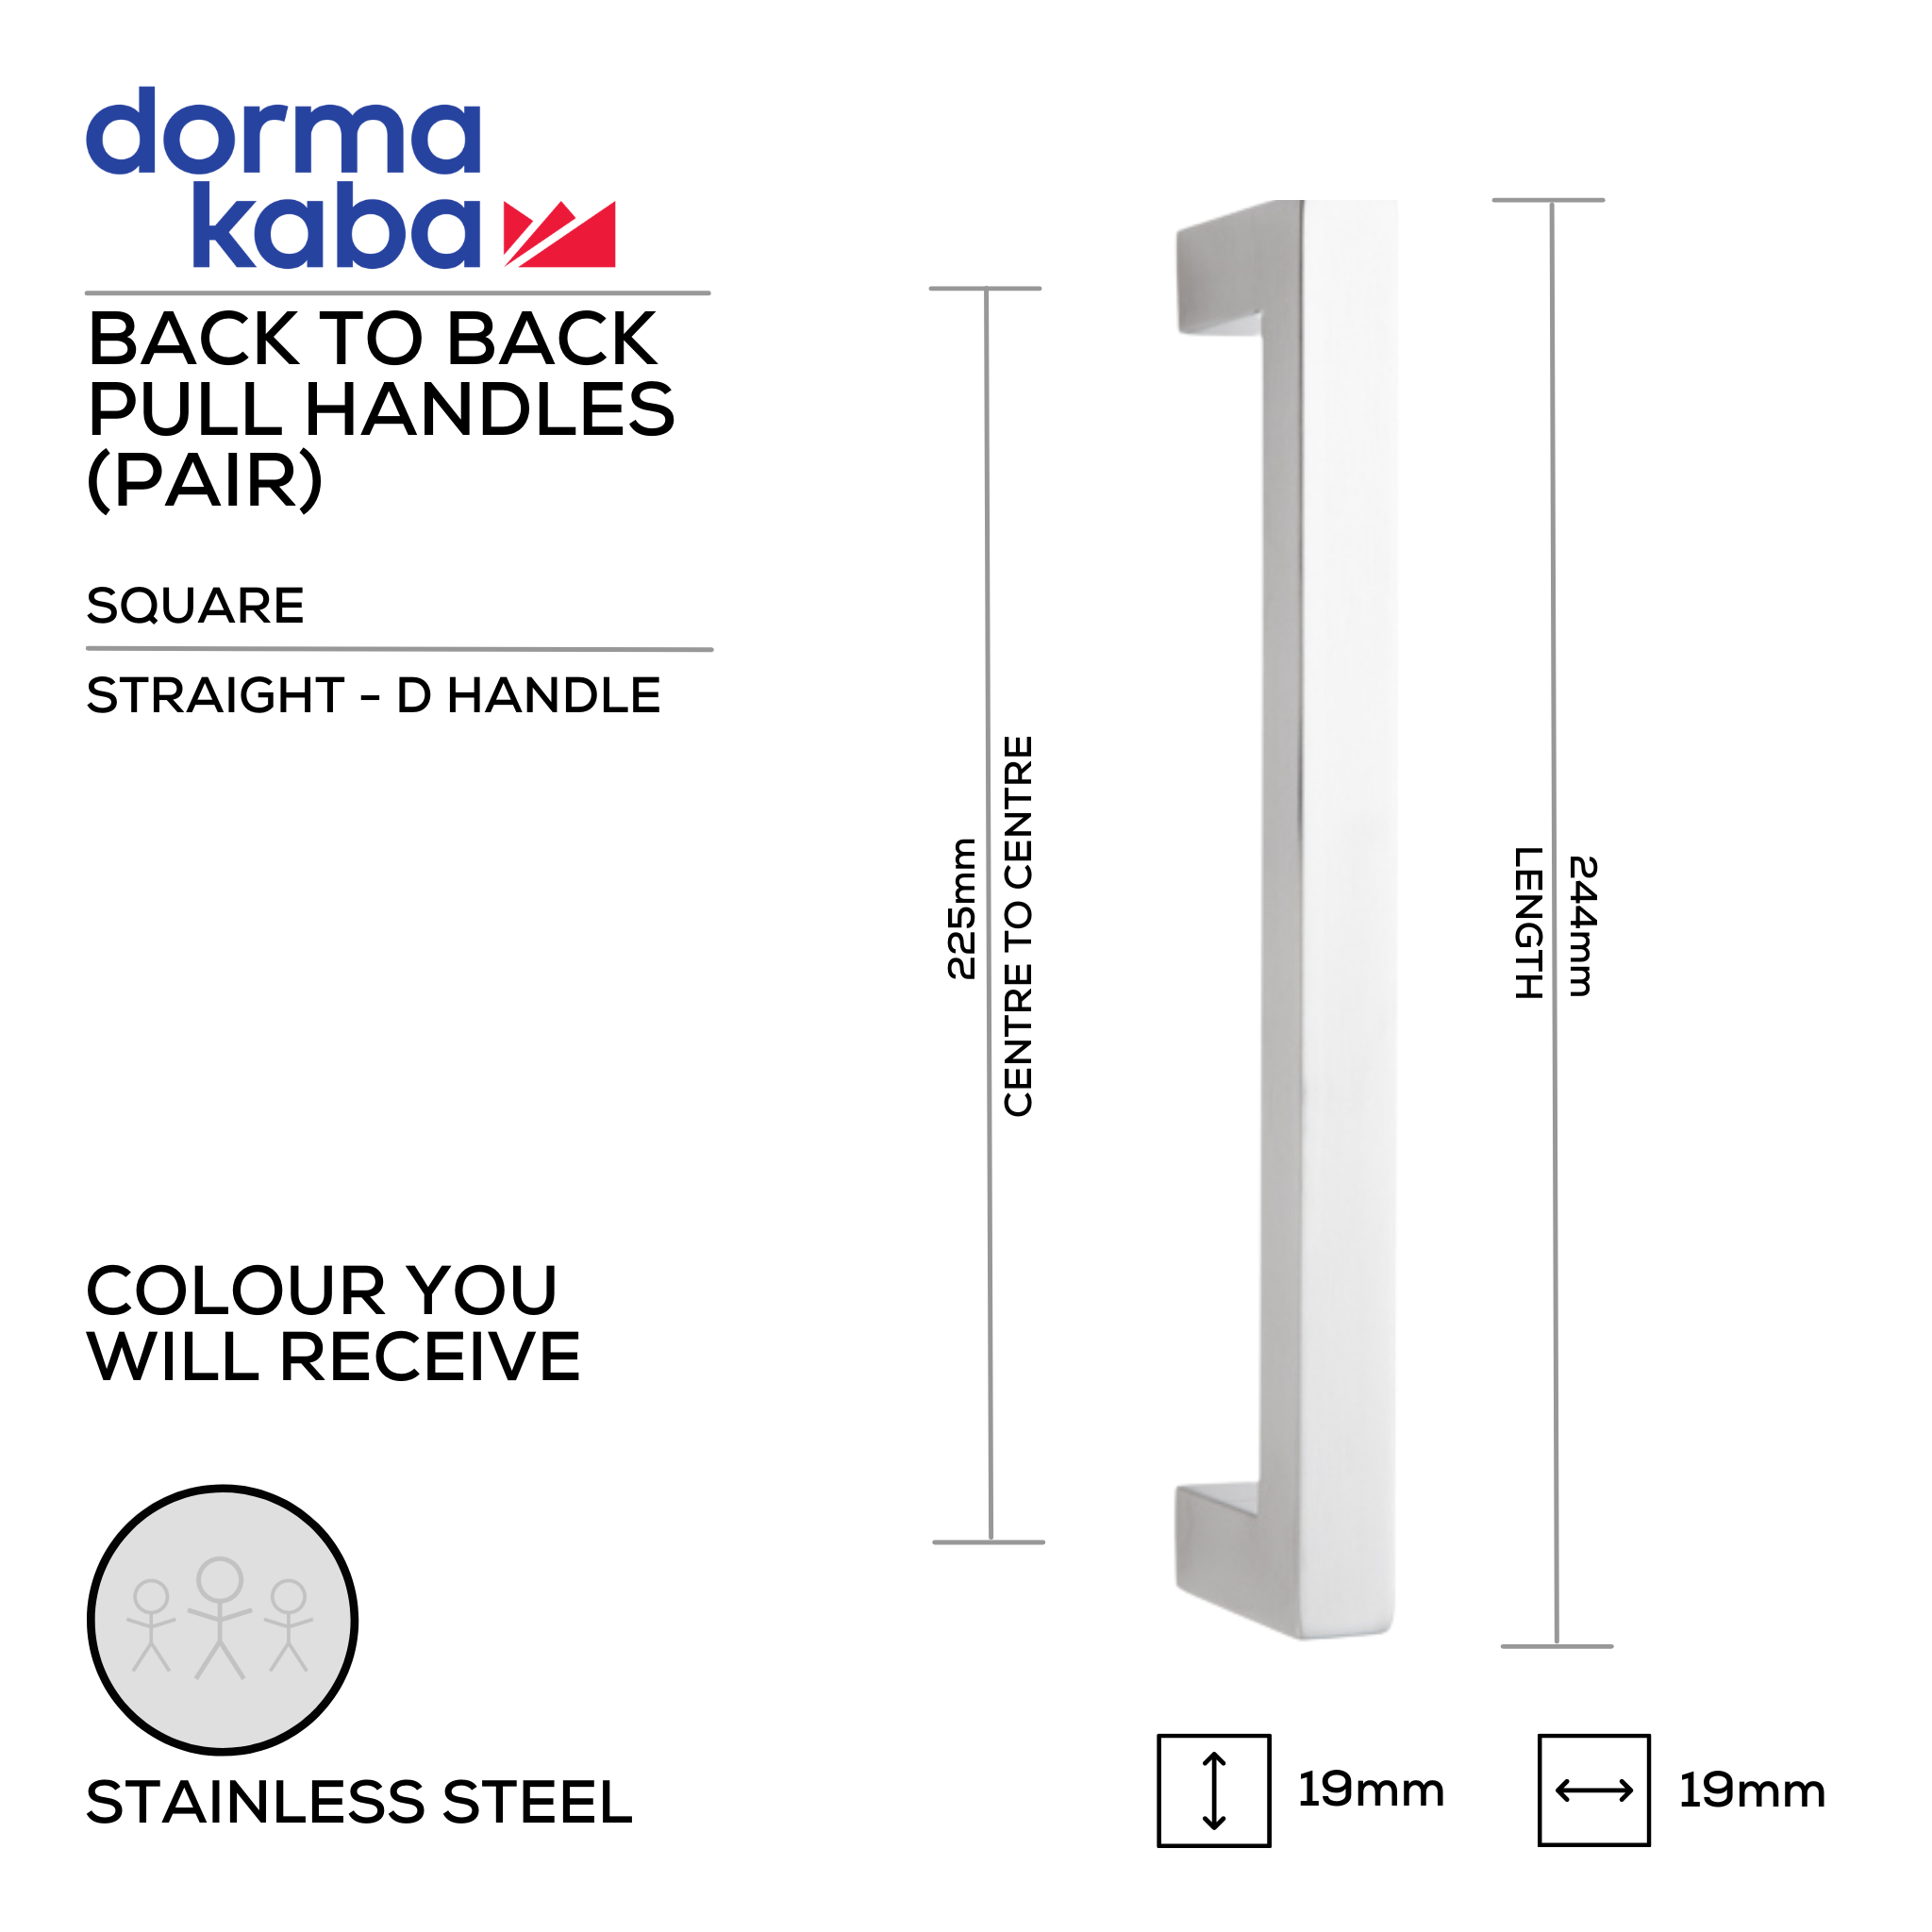 DSQ 06H 225 BTB, Pull Handle, Square, Straight, D Handle, BTB, 19mm (d) x 244mm (l) x 225mm (ctc), Stainless Steel, DORMAKABA